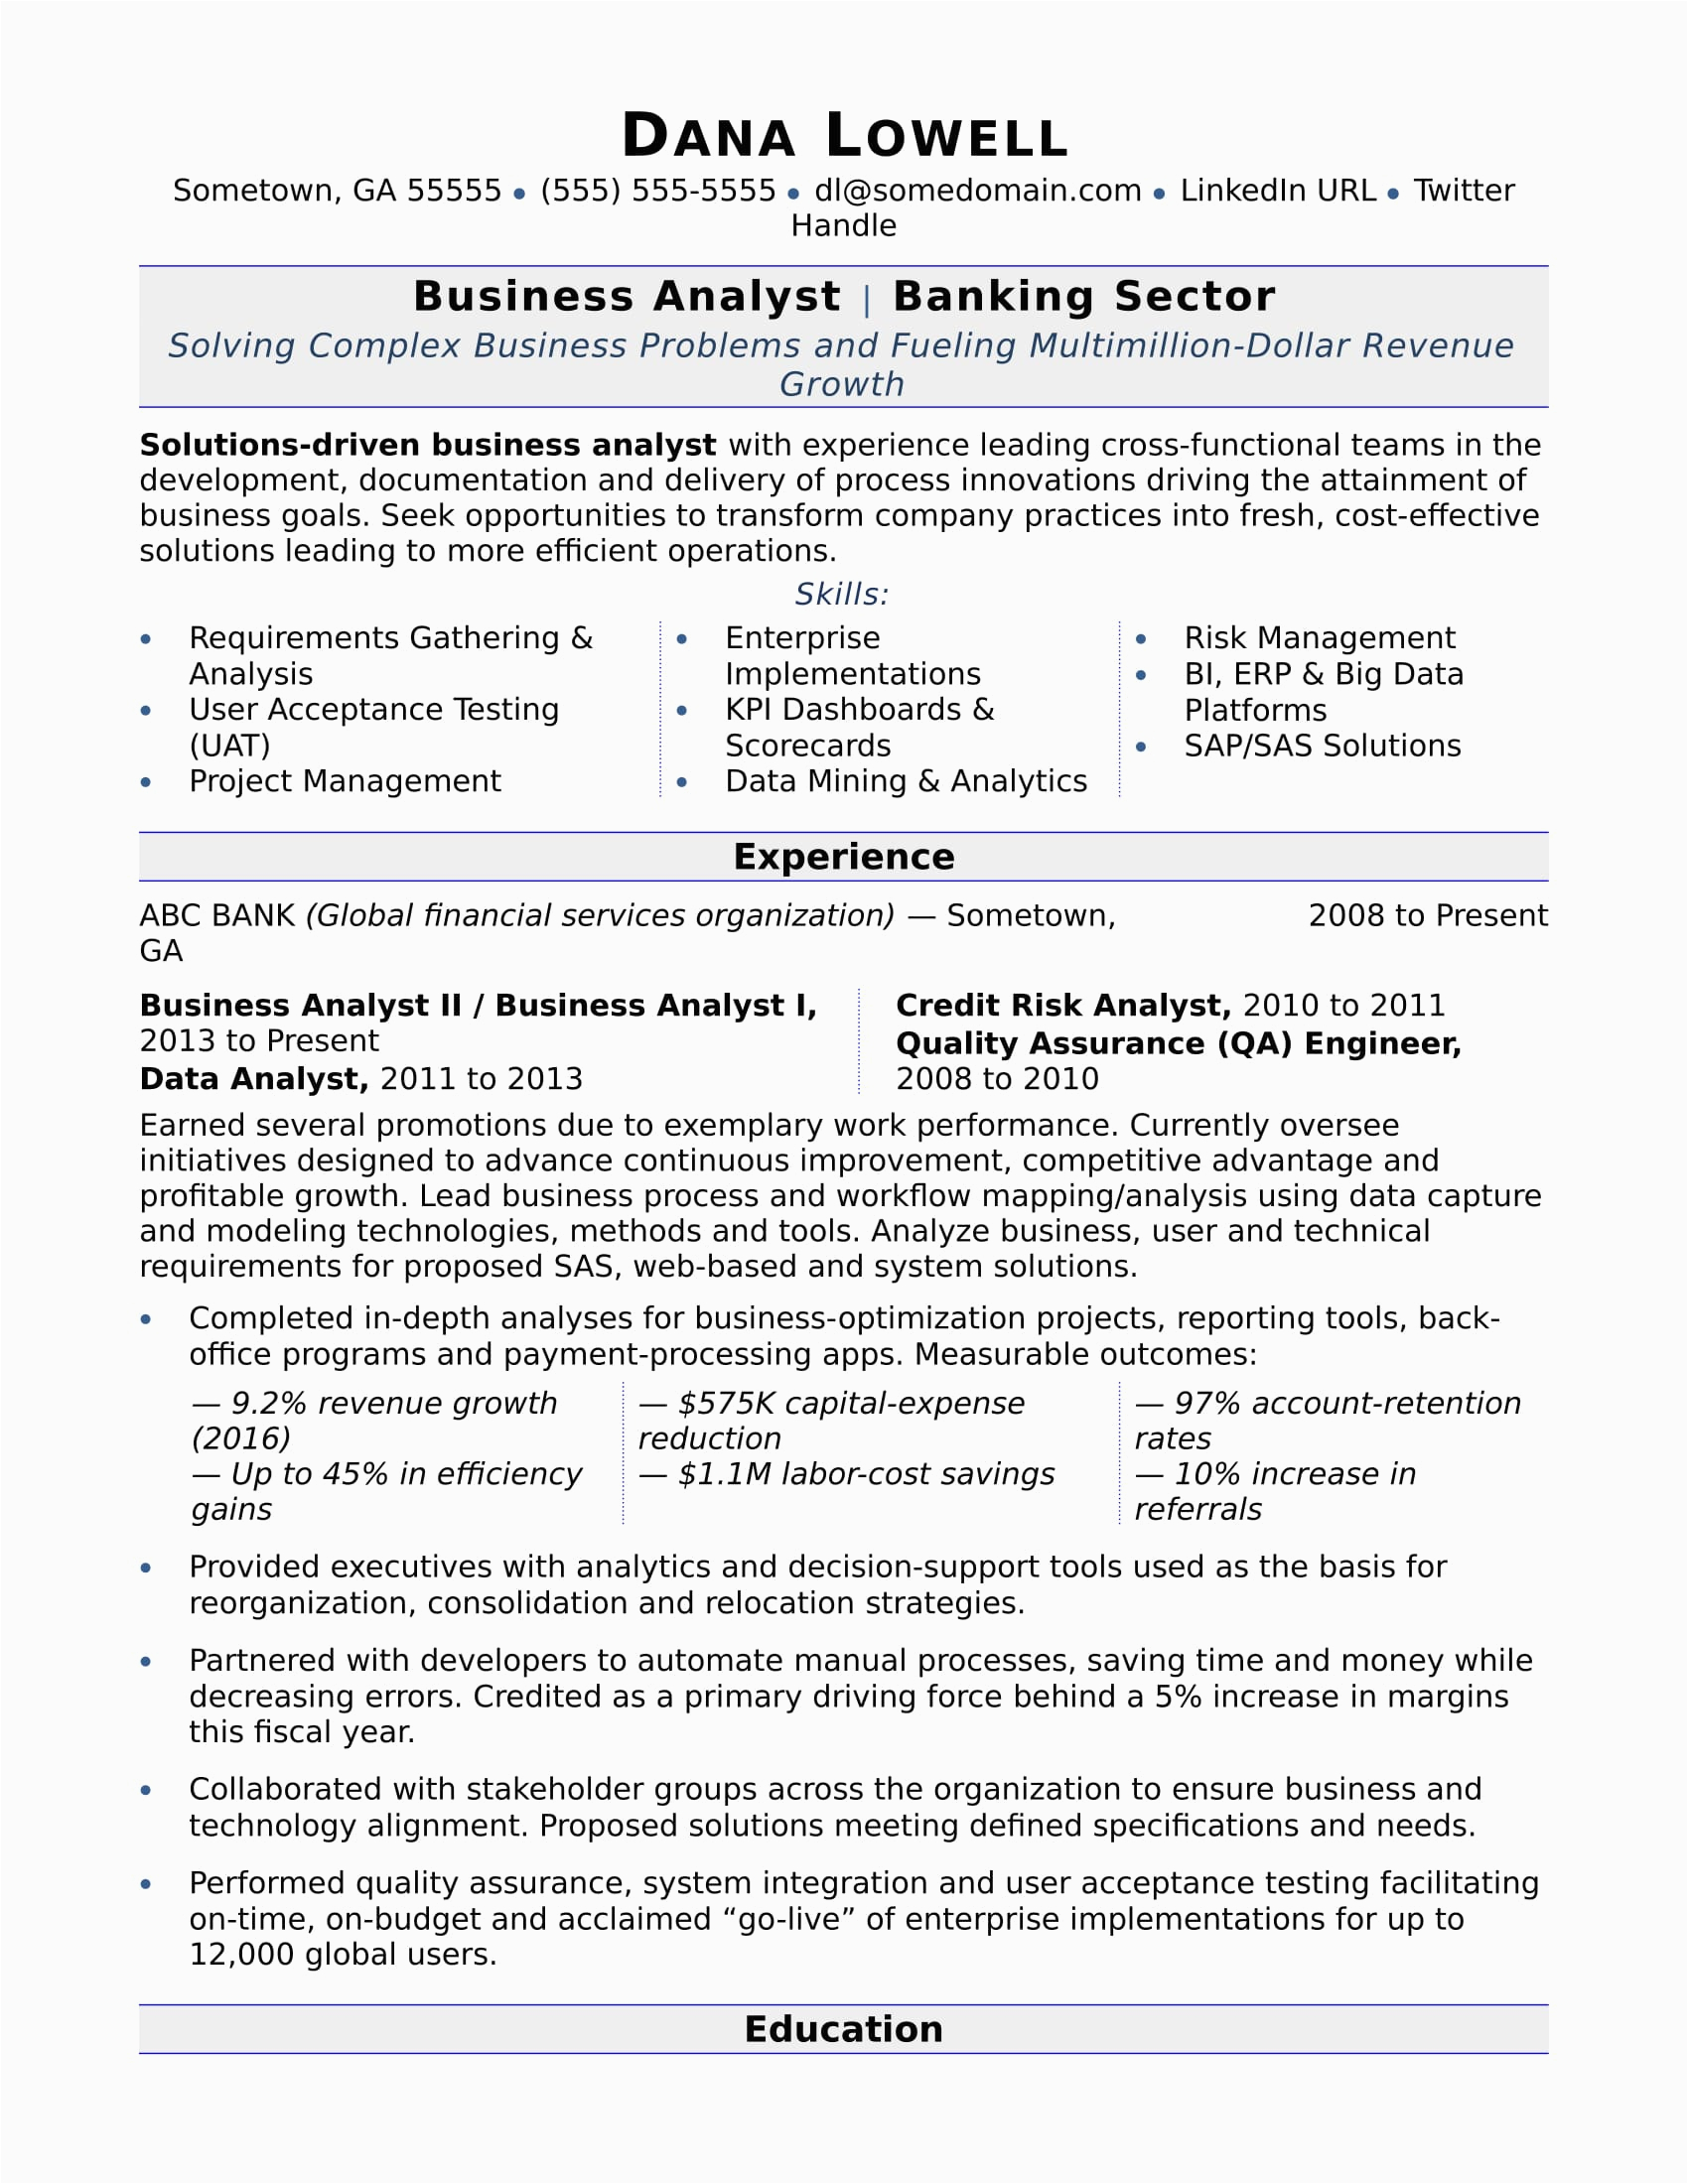 Sample Resume Objective Statement for Business Analyst Resume Samples for Business Analyst Entry Level Business Analyst Resumes